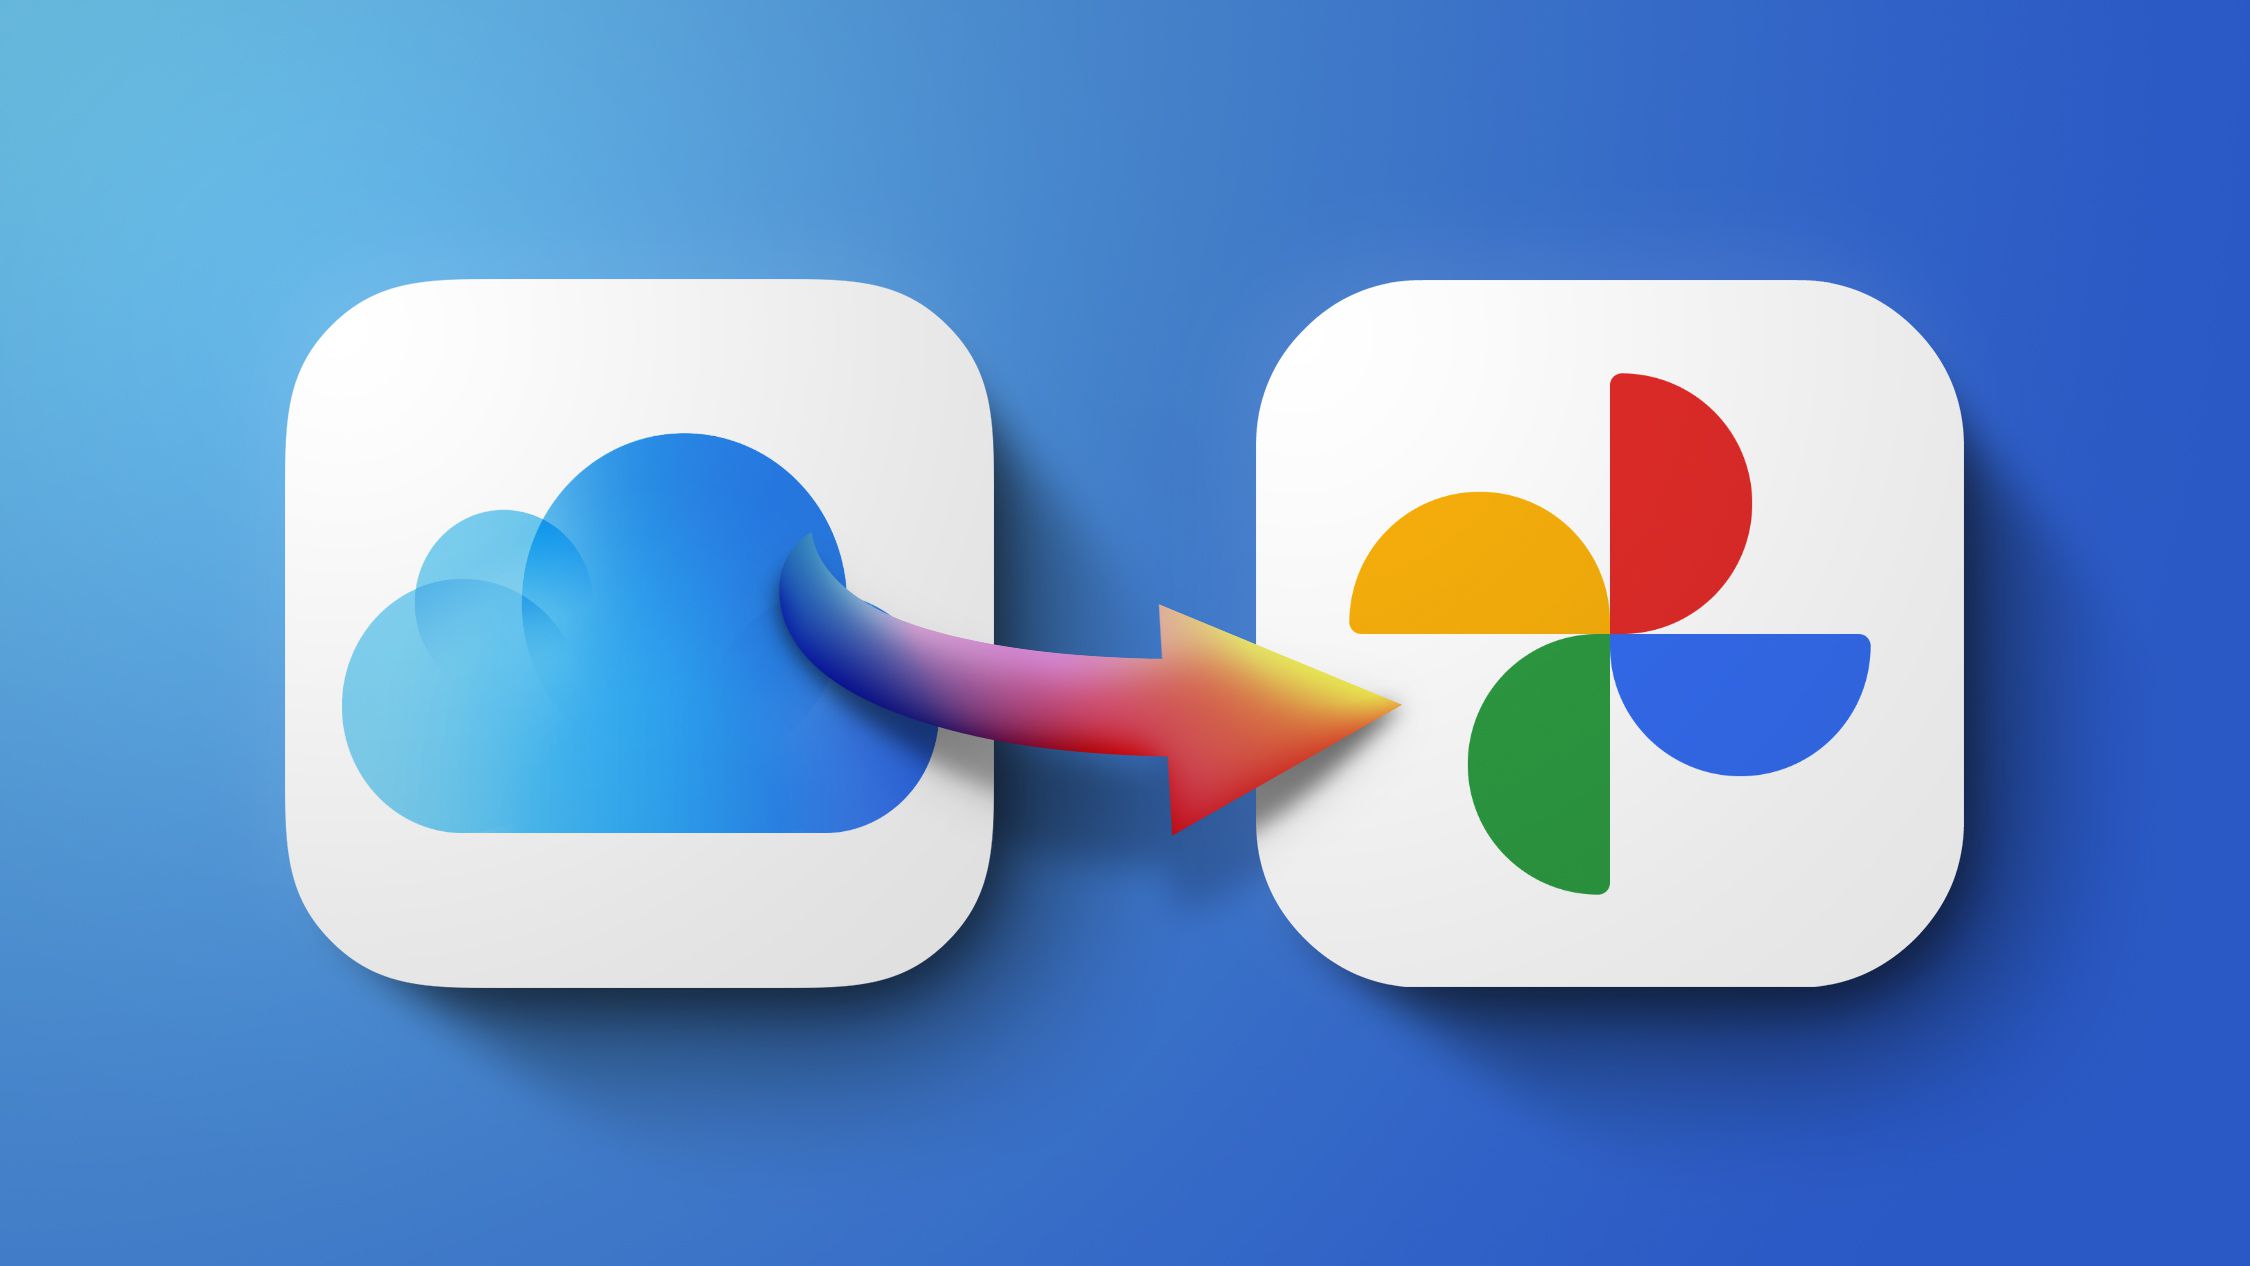 Apple is launching a service for transferring iCloud photos and videos to Google Photos